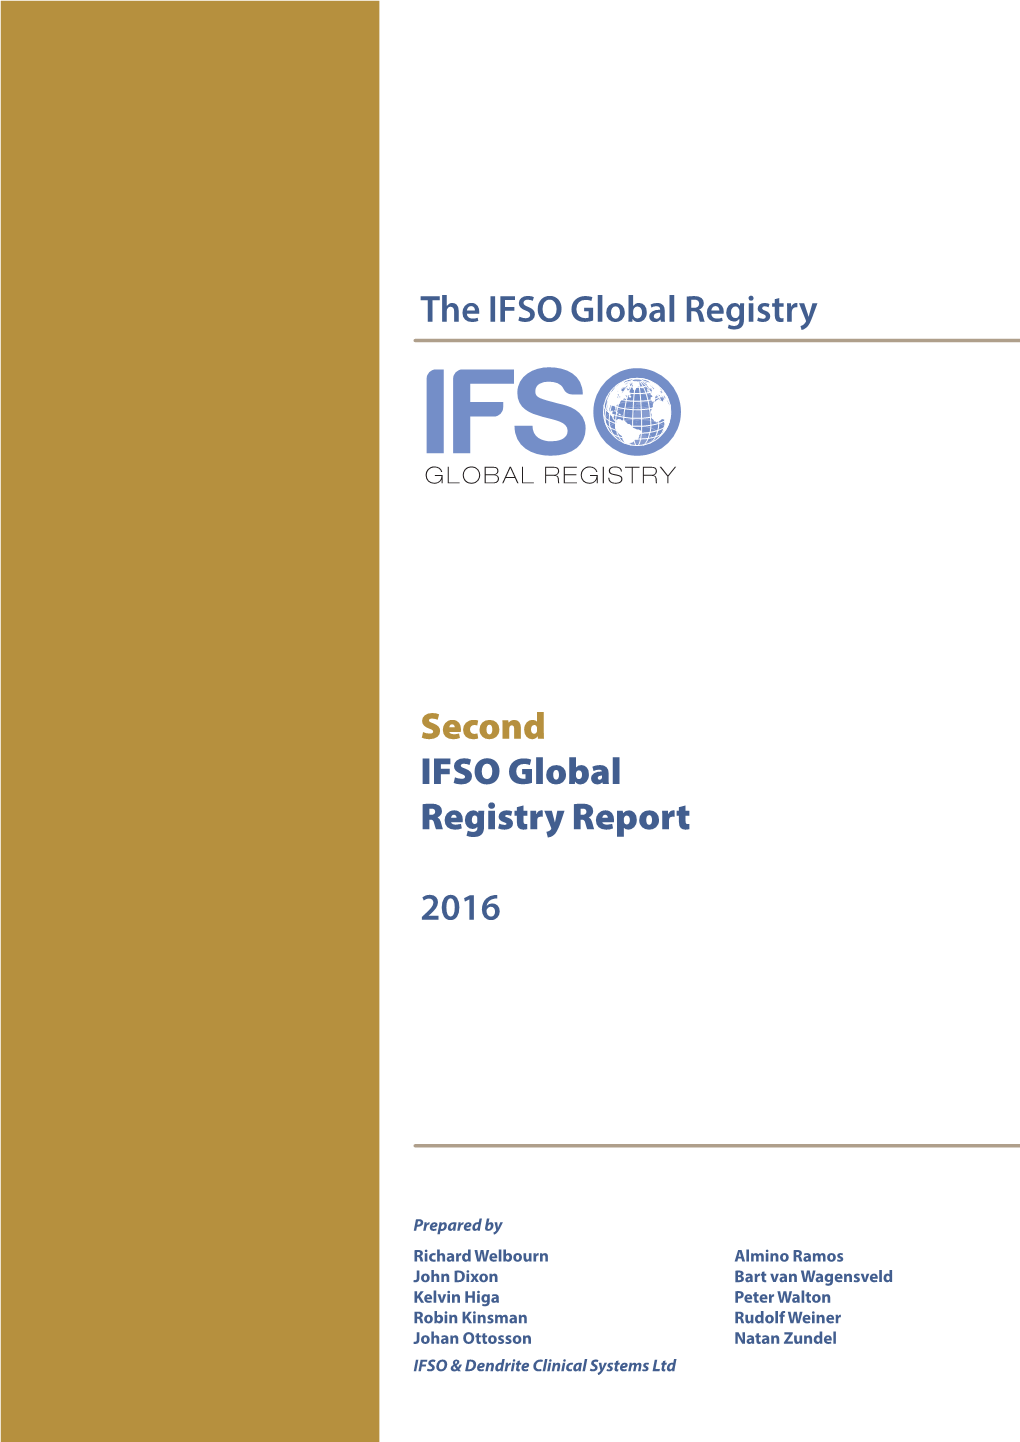 The IFSO Global Registry